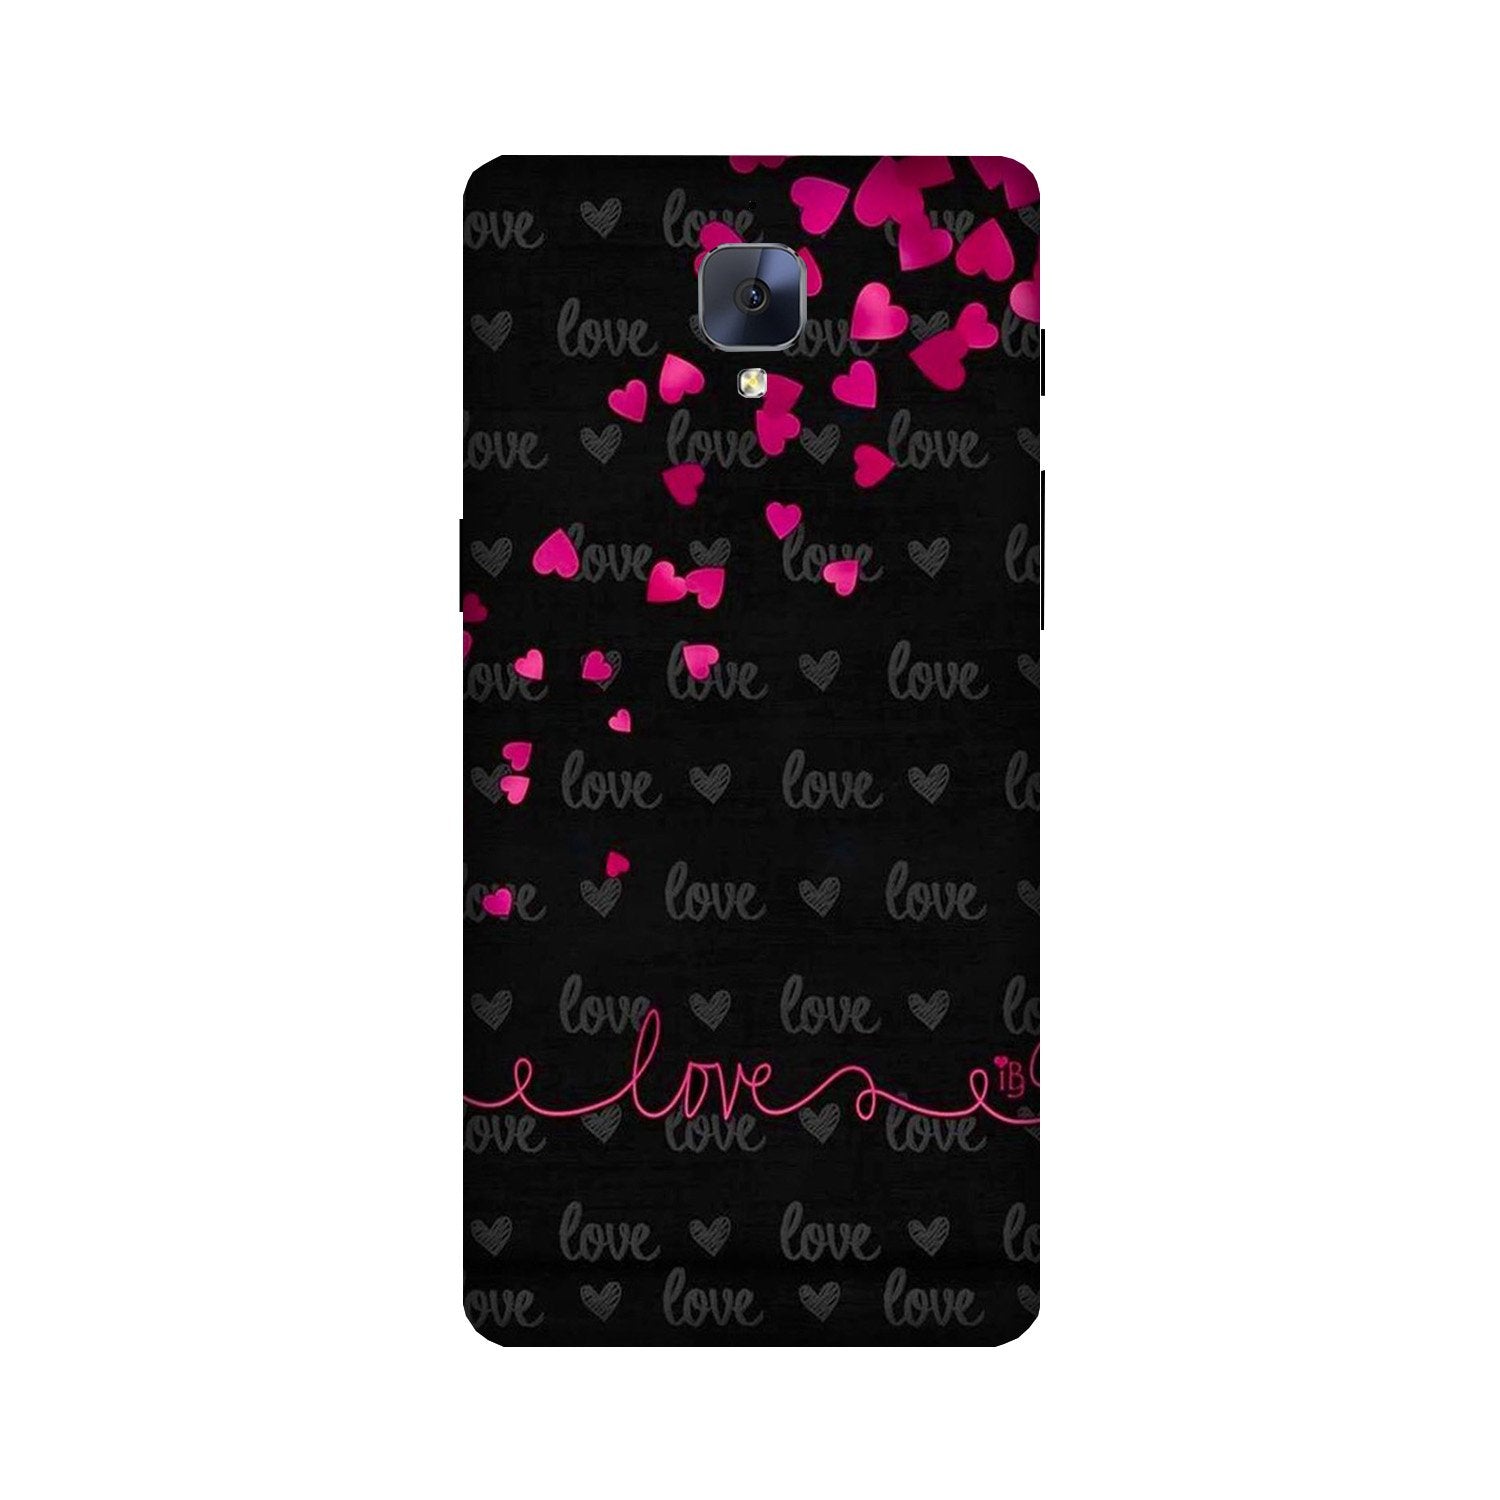 Love in Air Case for OnePlus 3/ 3T